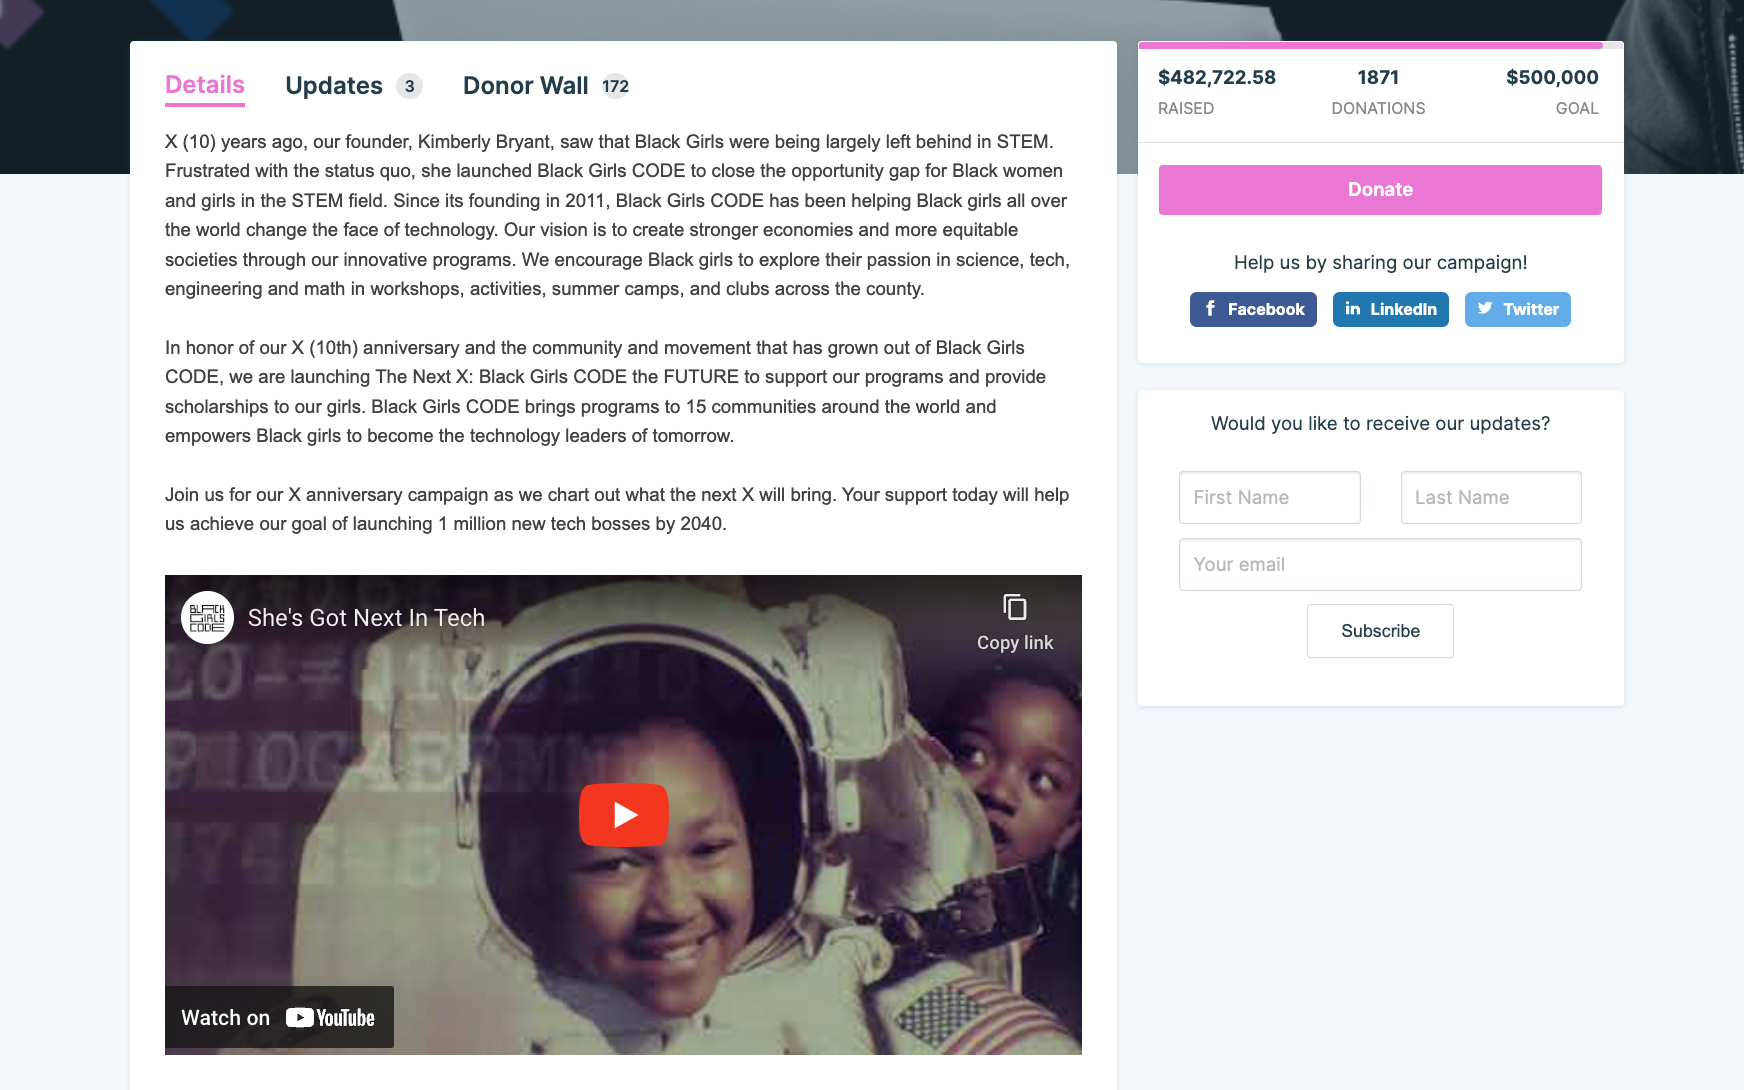 Black Girls Code example of how to design a crowdfunding page